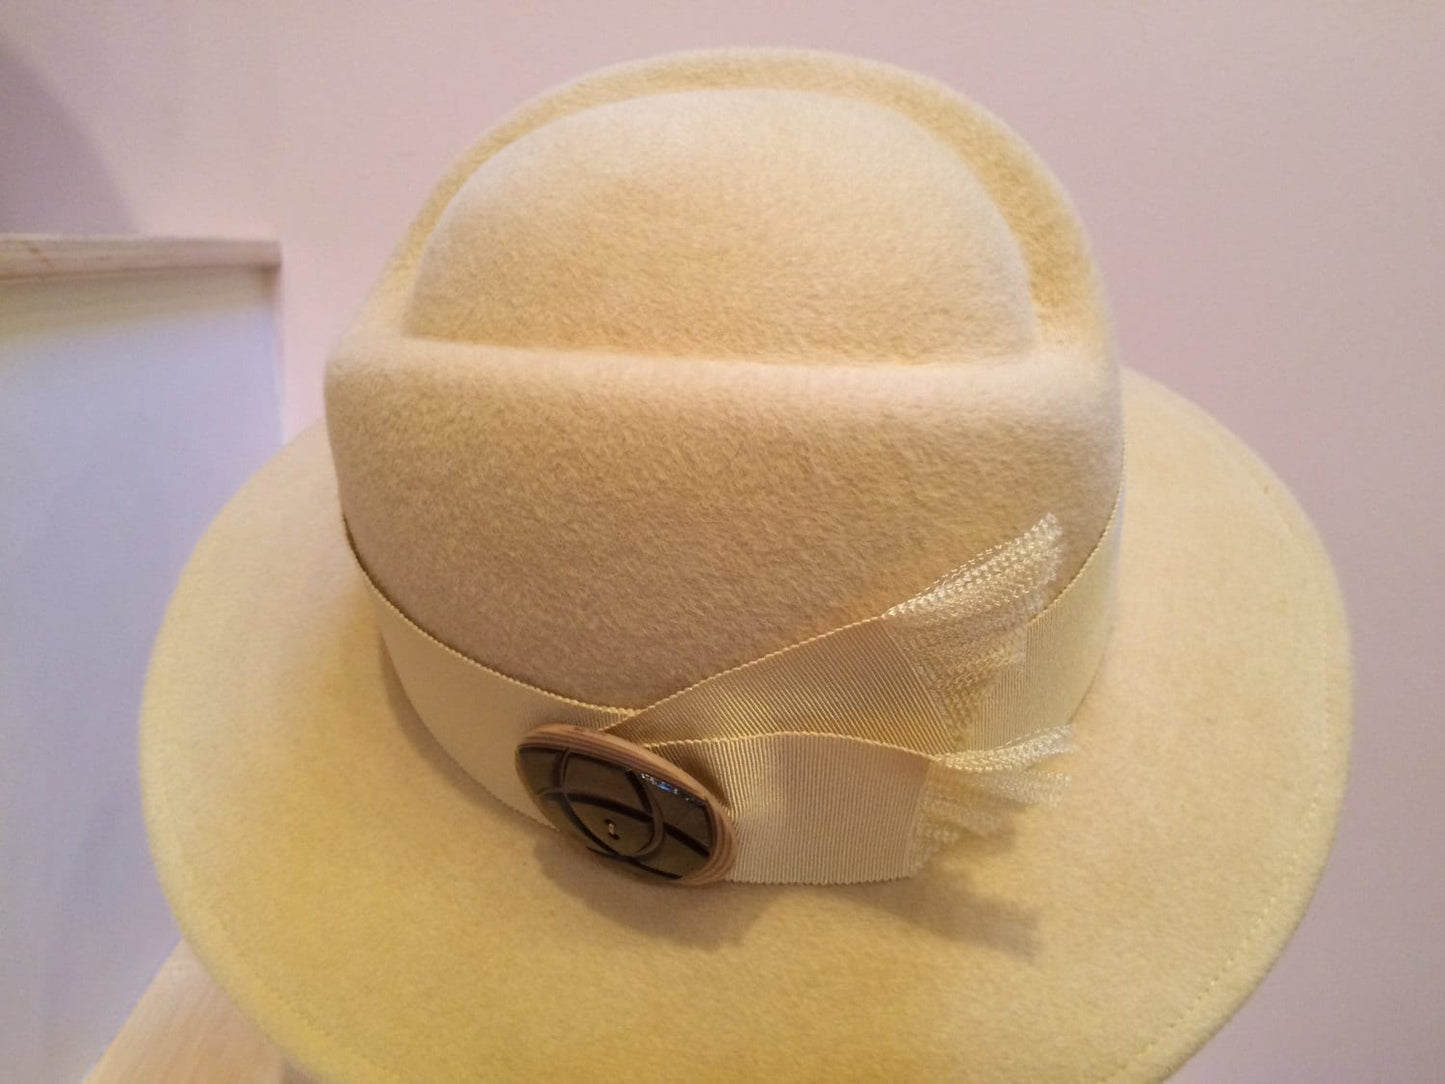 Soft Buttery Yellow Velour Wool Felt Hat with Grosgrain Ribbon and Vintage Wooden Button. Perfect Church Hat or your favorite 'go to' item.